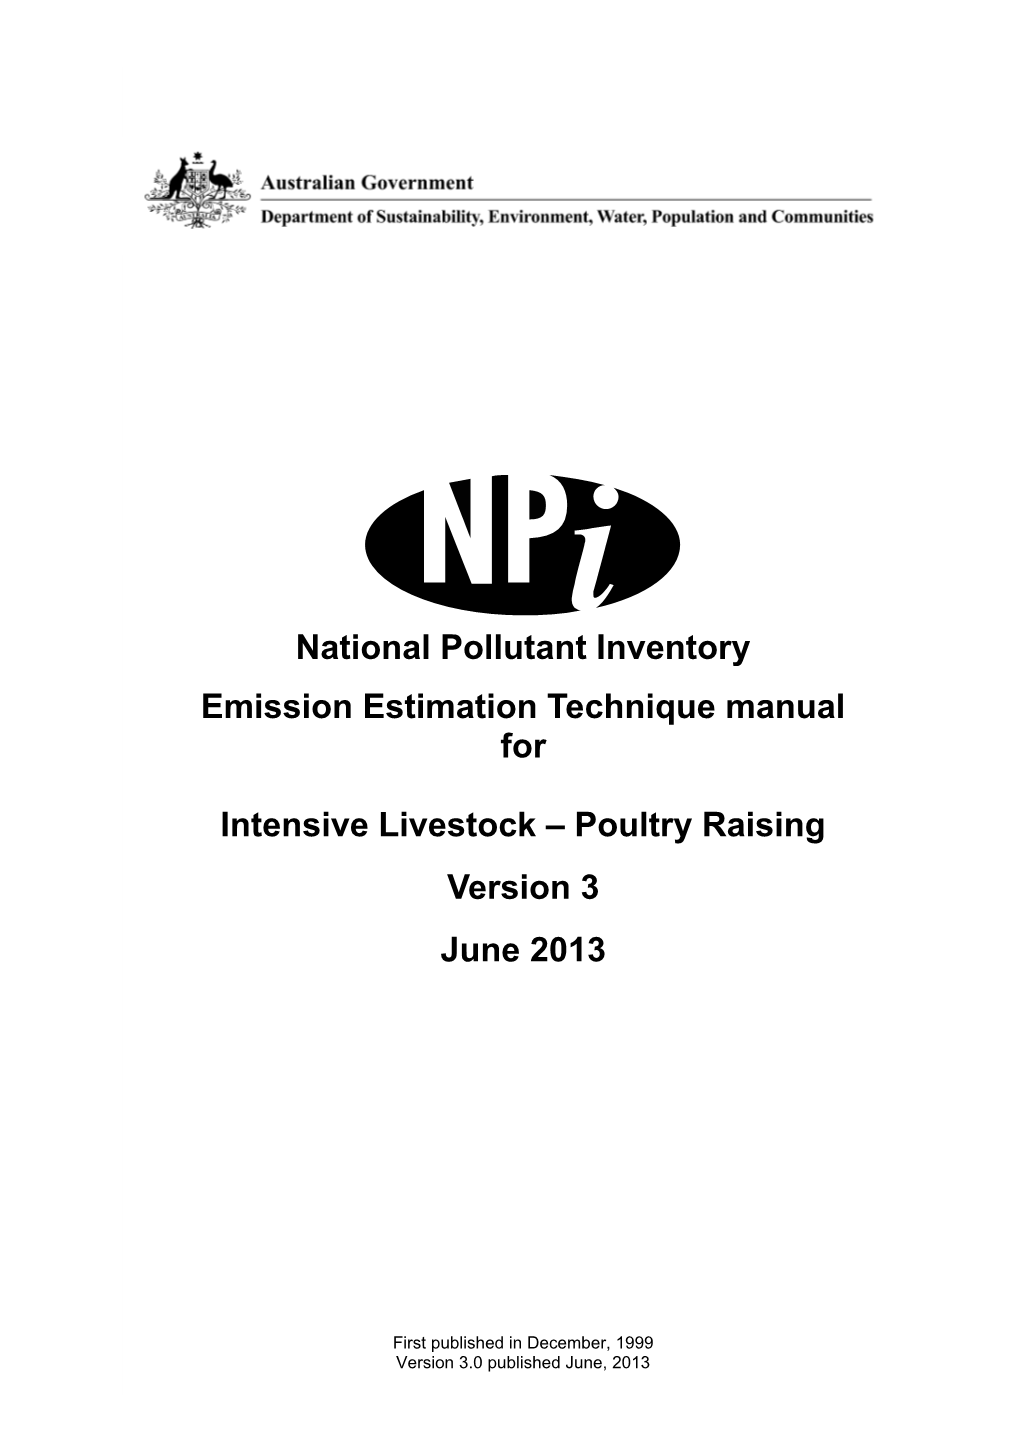 NPI EETM Combustion in Boilers Ver 3.2